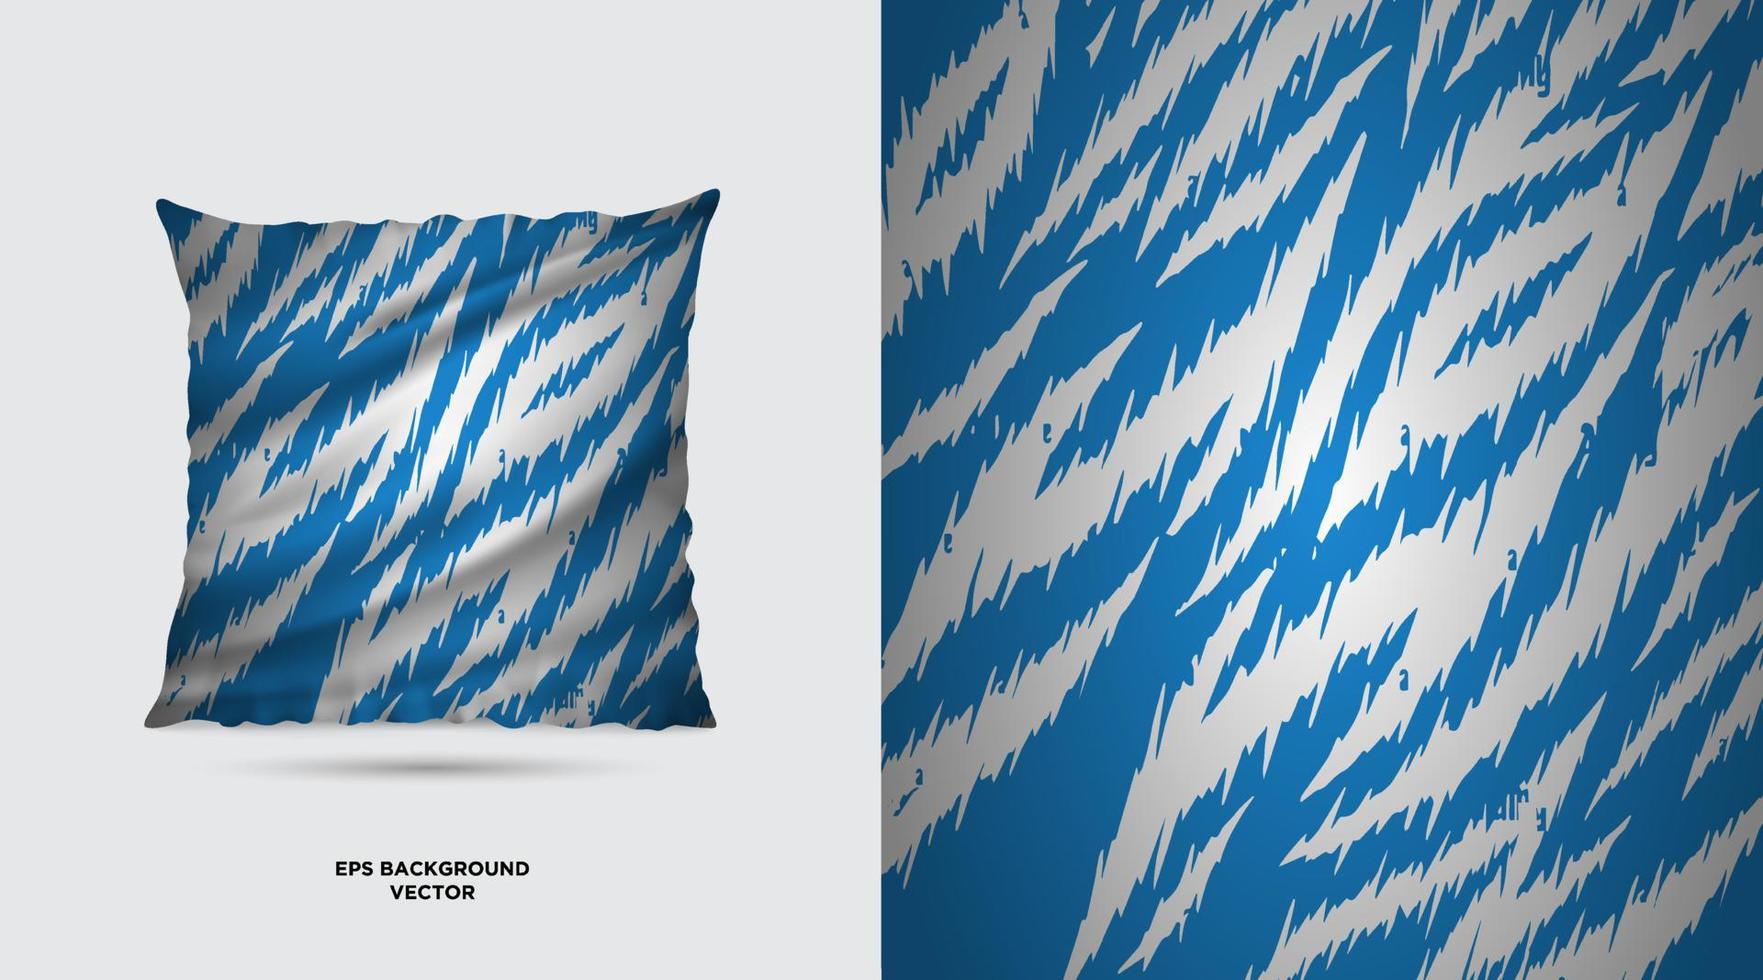 Futuristic Fabric textile pattern design template vector. Beautiful Fabric Painting Designs For Pillow Covers vector